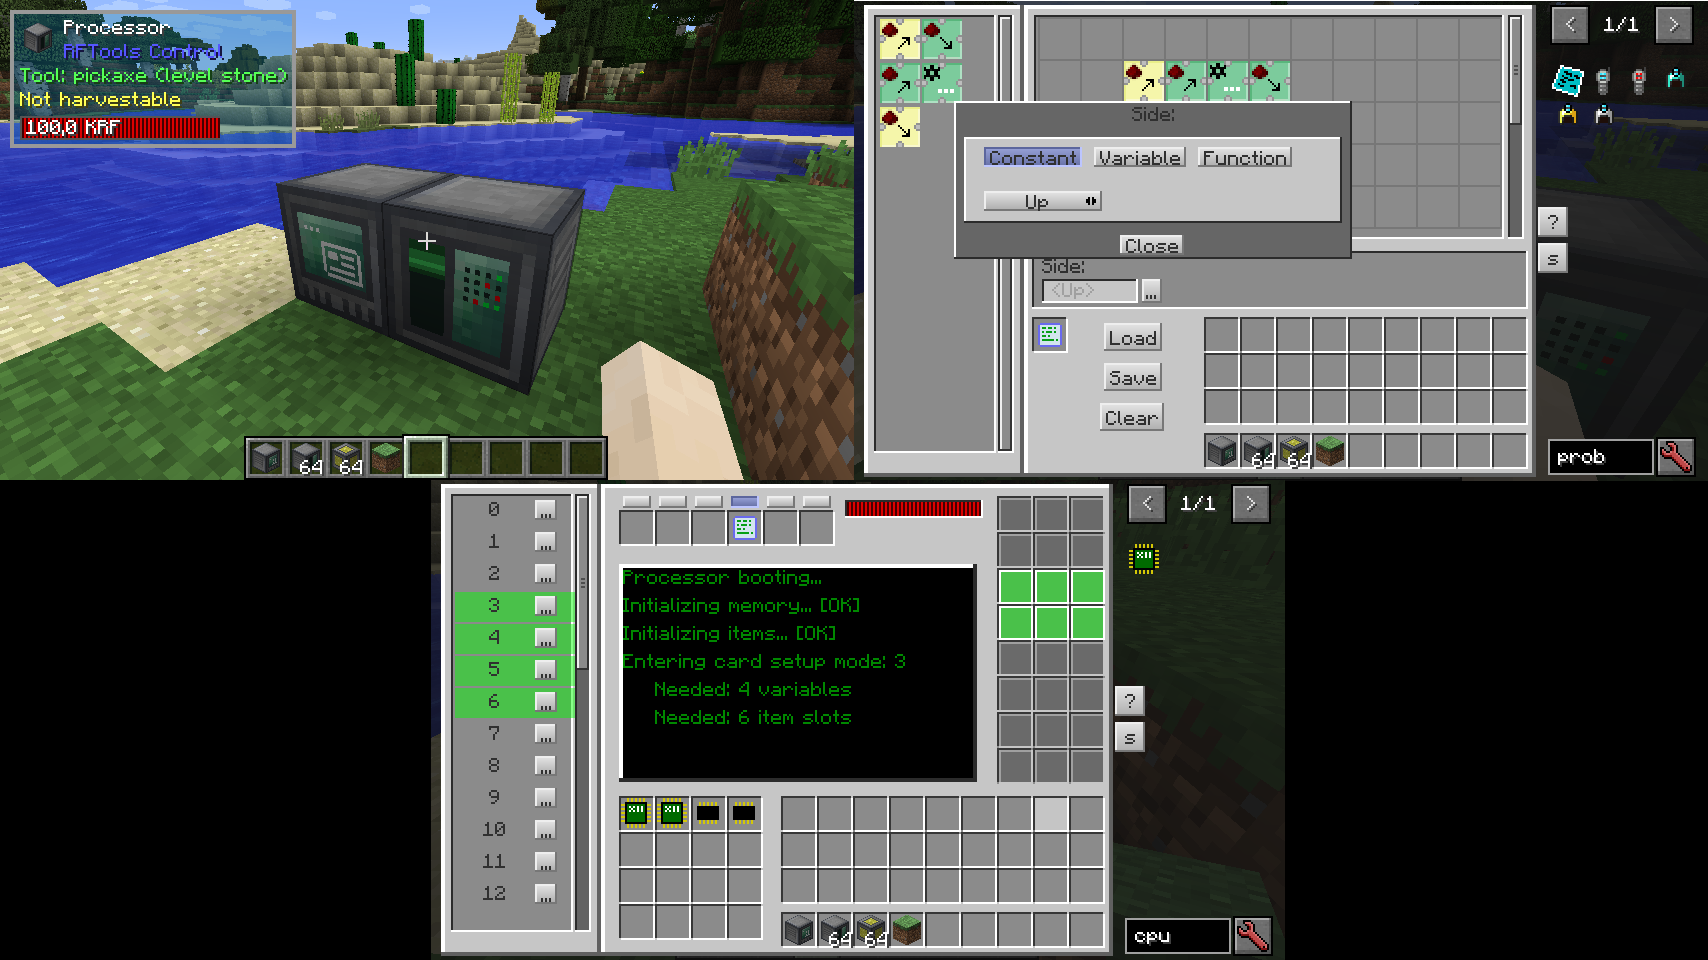 Hi, I would like to show you some progress screenshots for my new upcoming RFTools...